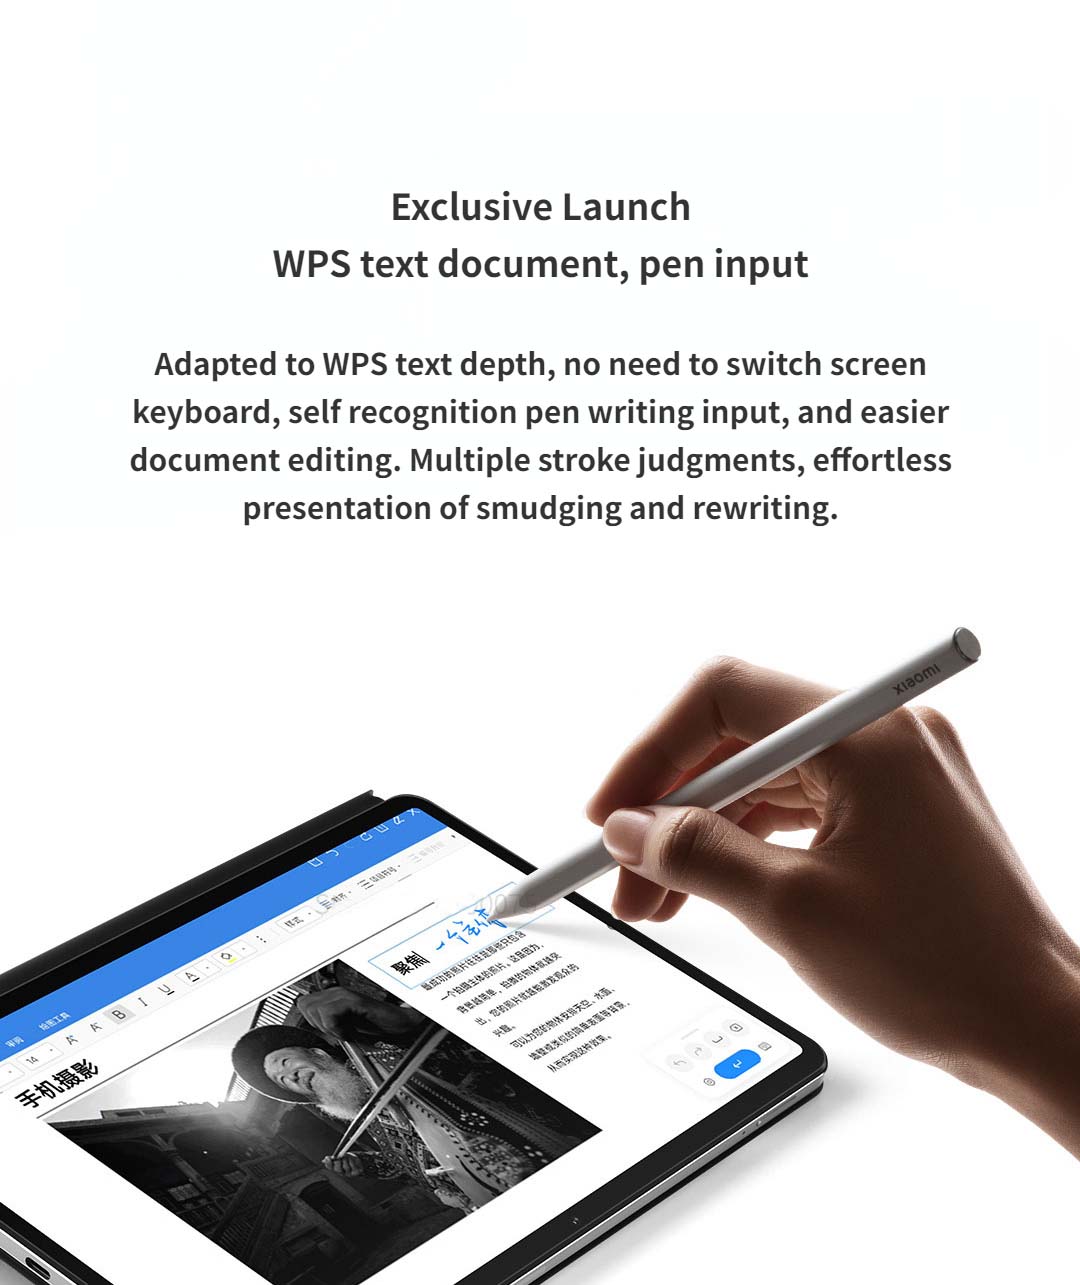 Xiaomi India on X: Here's a pen that caters to all your note-taking needs  and ensures you #doitbetter. Pair your Xiaomi Smart Pen with the  #XiaomiPad5 and experience precision in every stroke